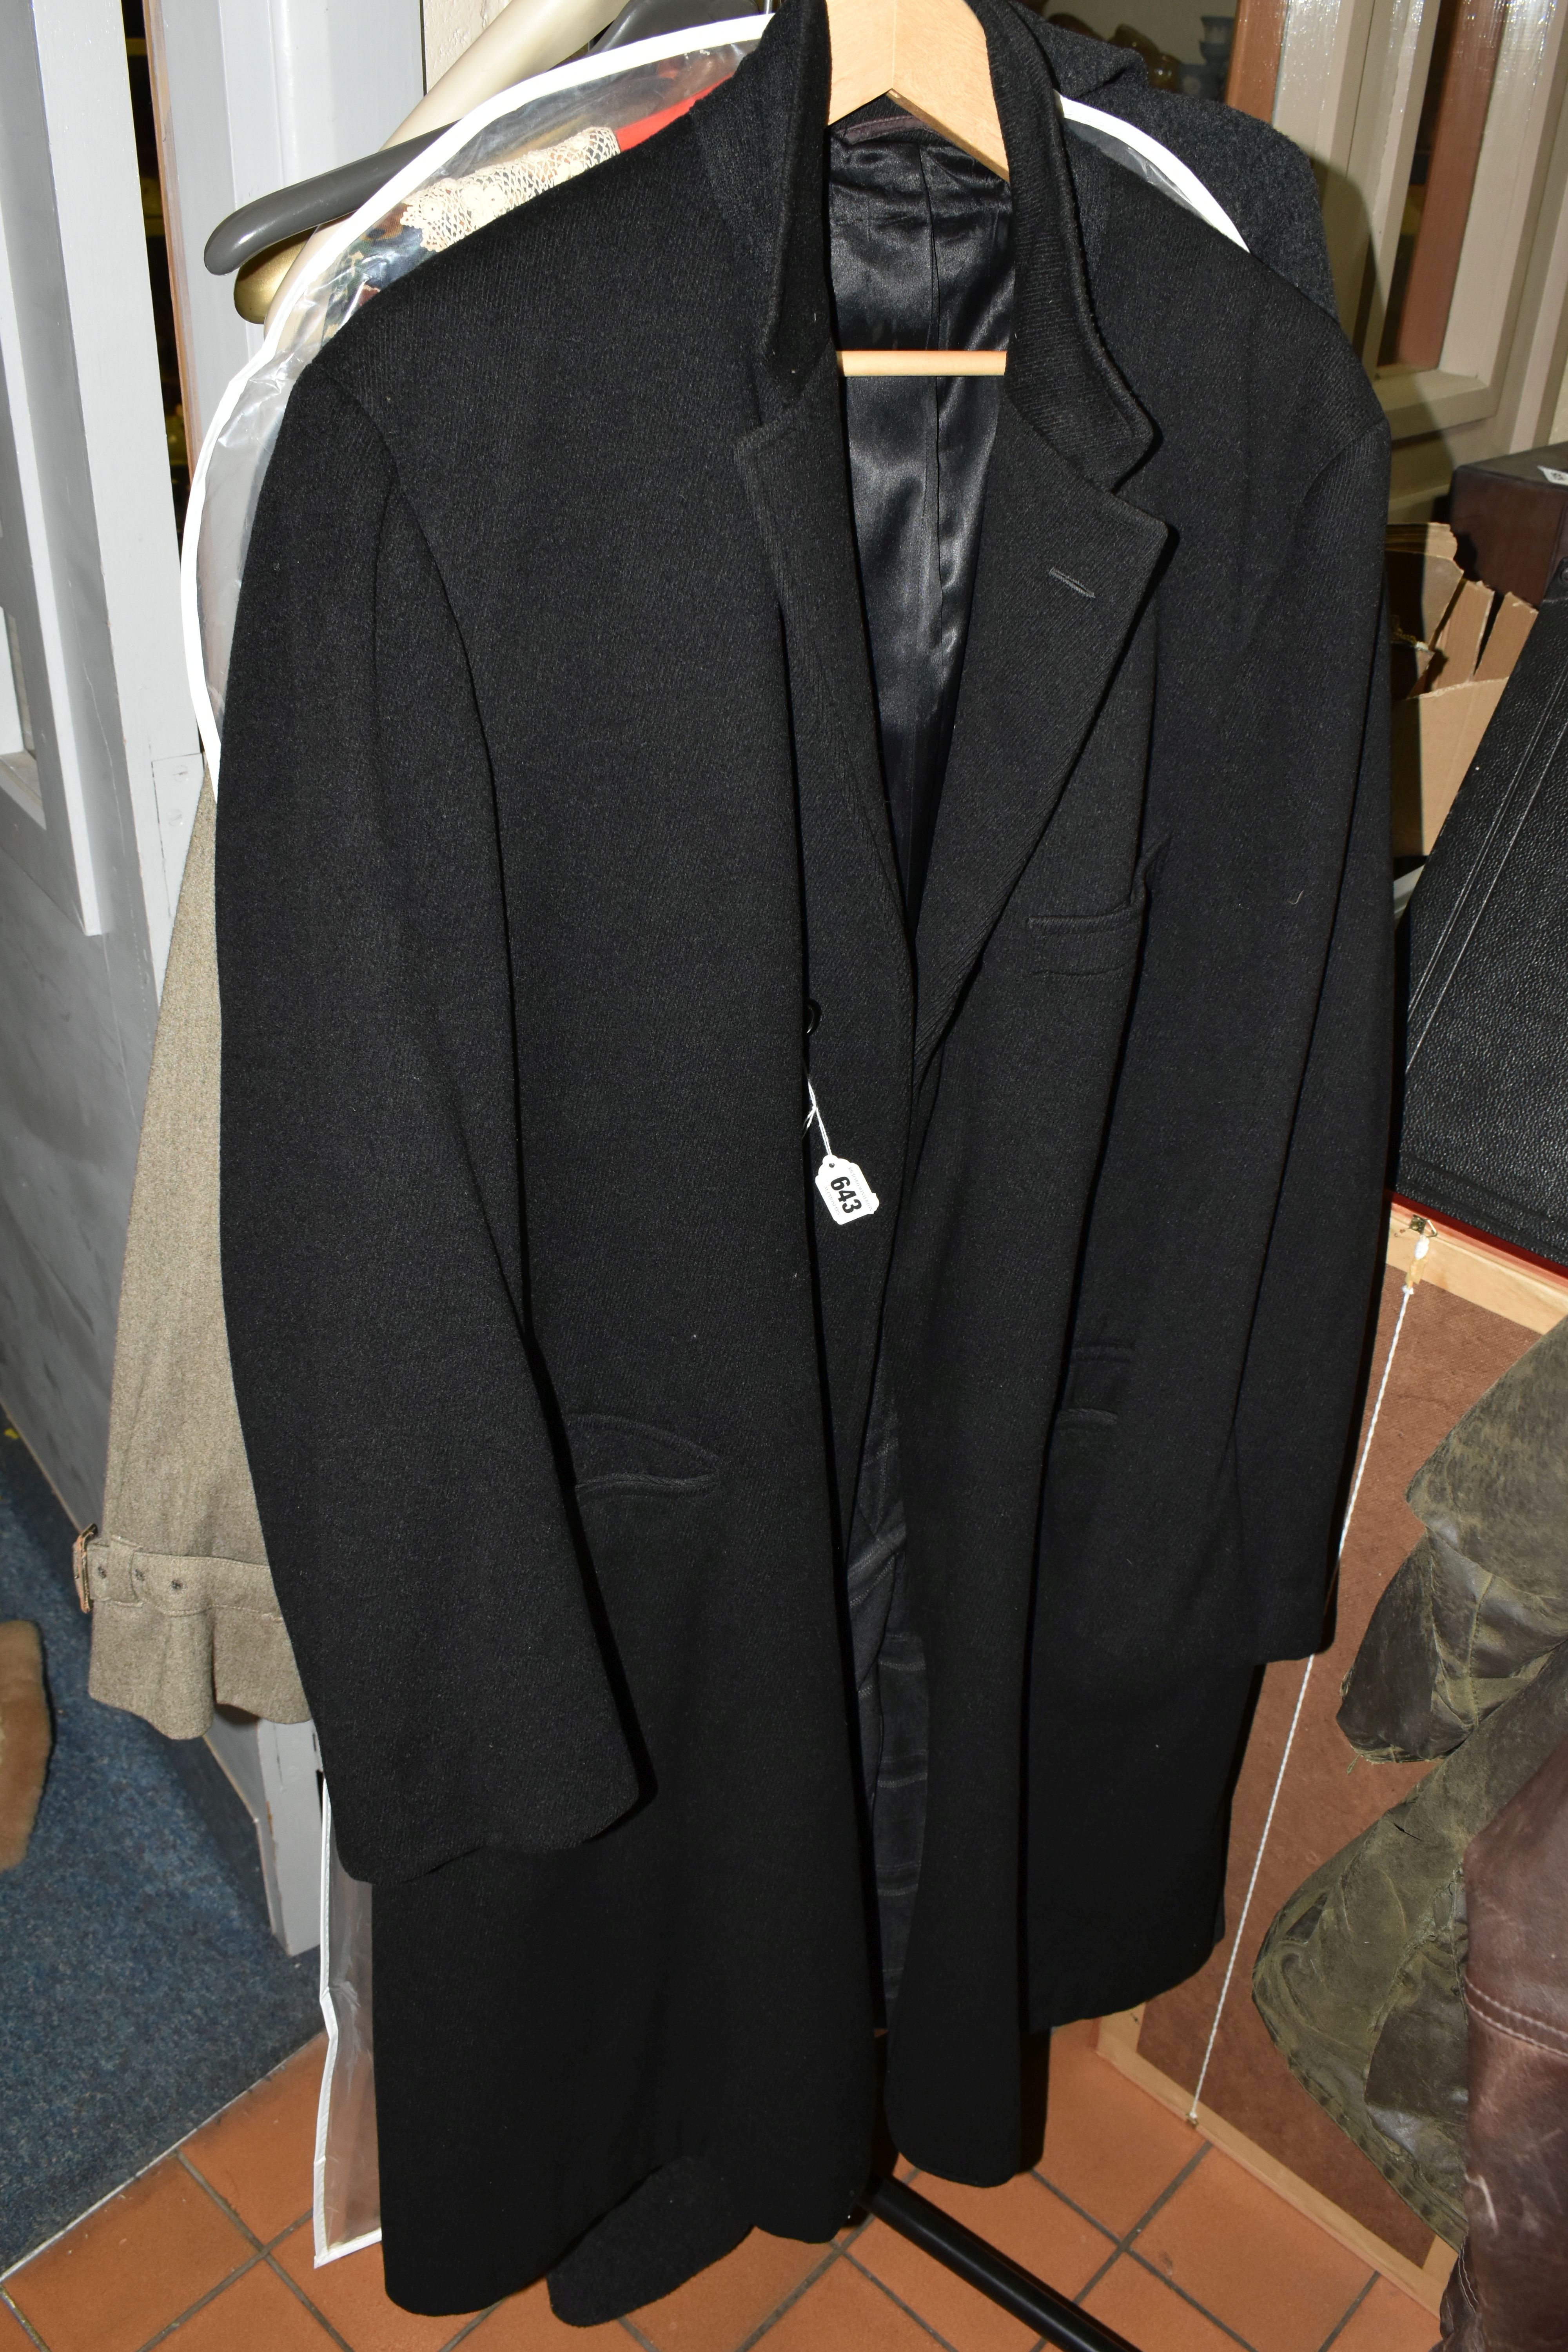 FOUR ITEMS OF CLOTHING, comprising a gentleman's Aquascutum showerproof pure new wool overcoat